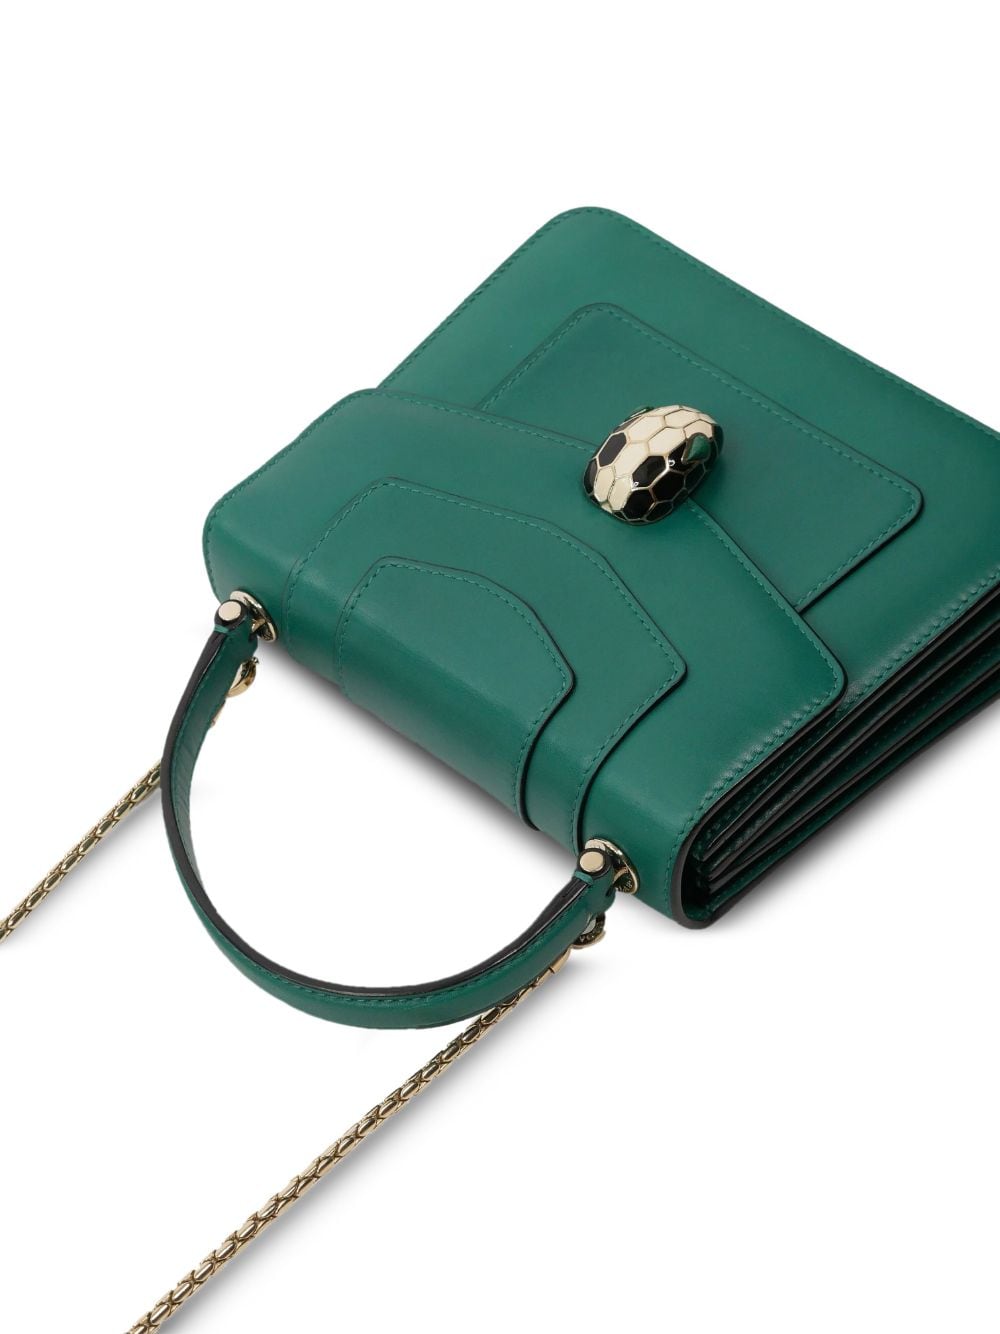 How to authenticate your Bvlgari Serpenti Forever Crossbody bag using